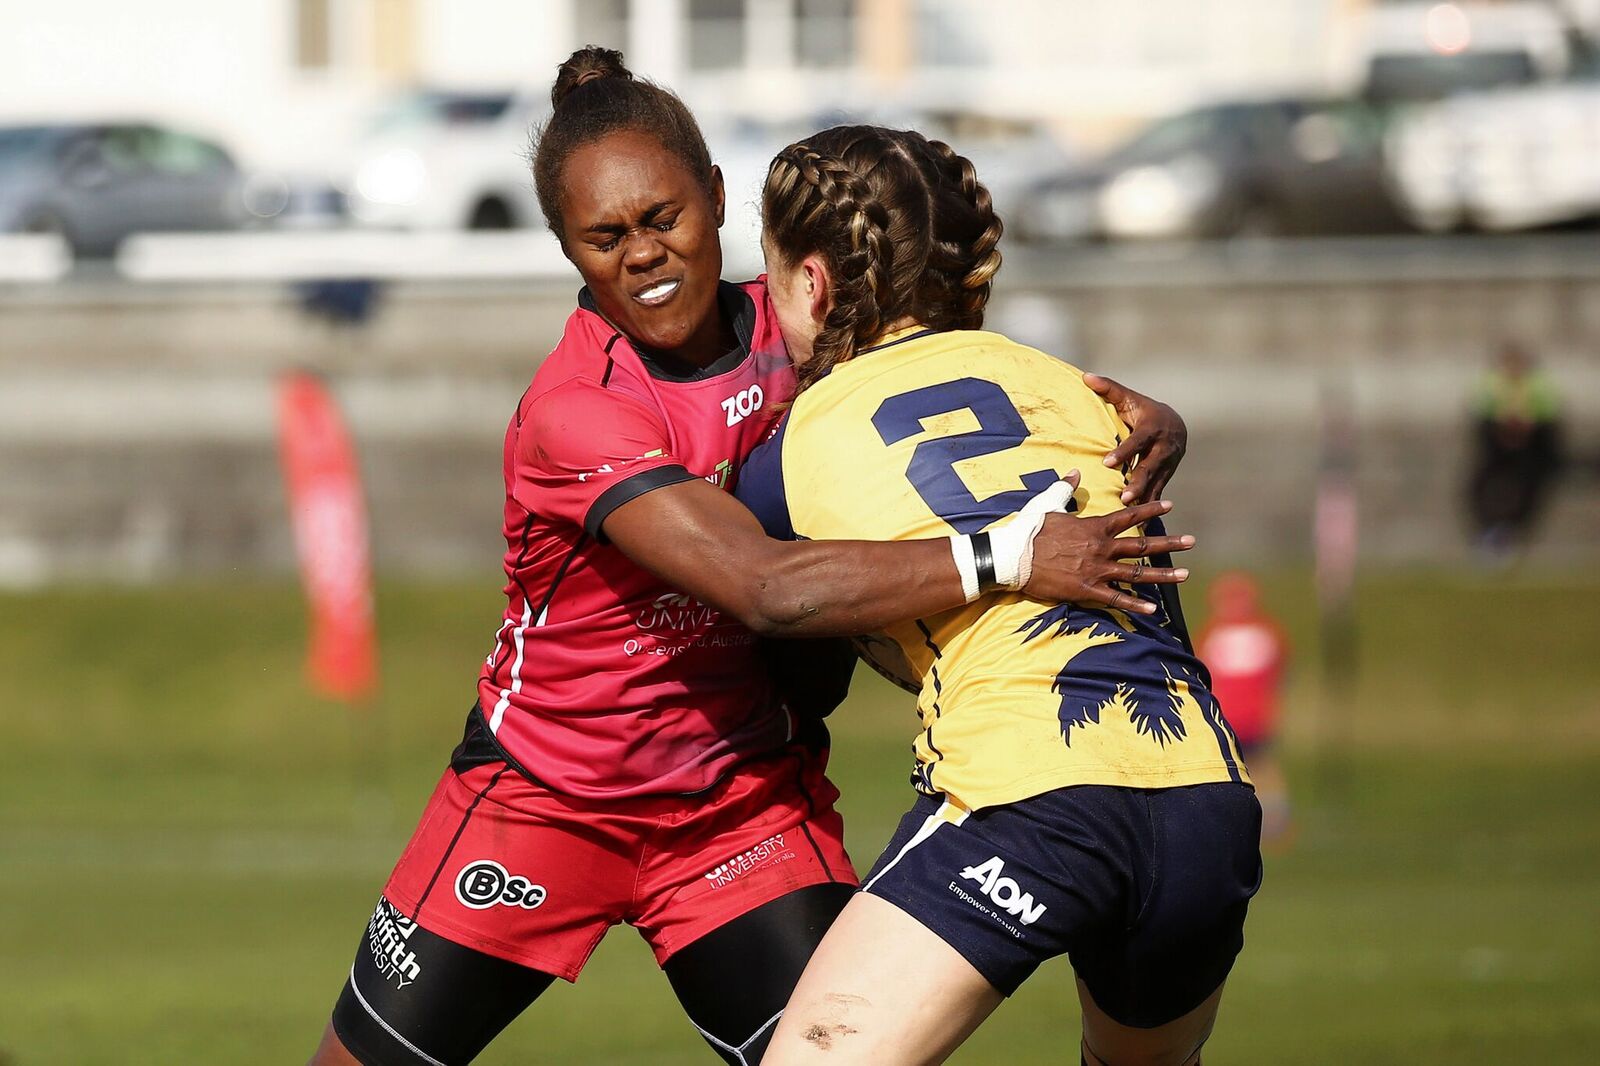 Griffith University Women's Rugby Sevens team will renew acquaintances with Bond opponents at CBUS Super Stadium this weekend.